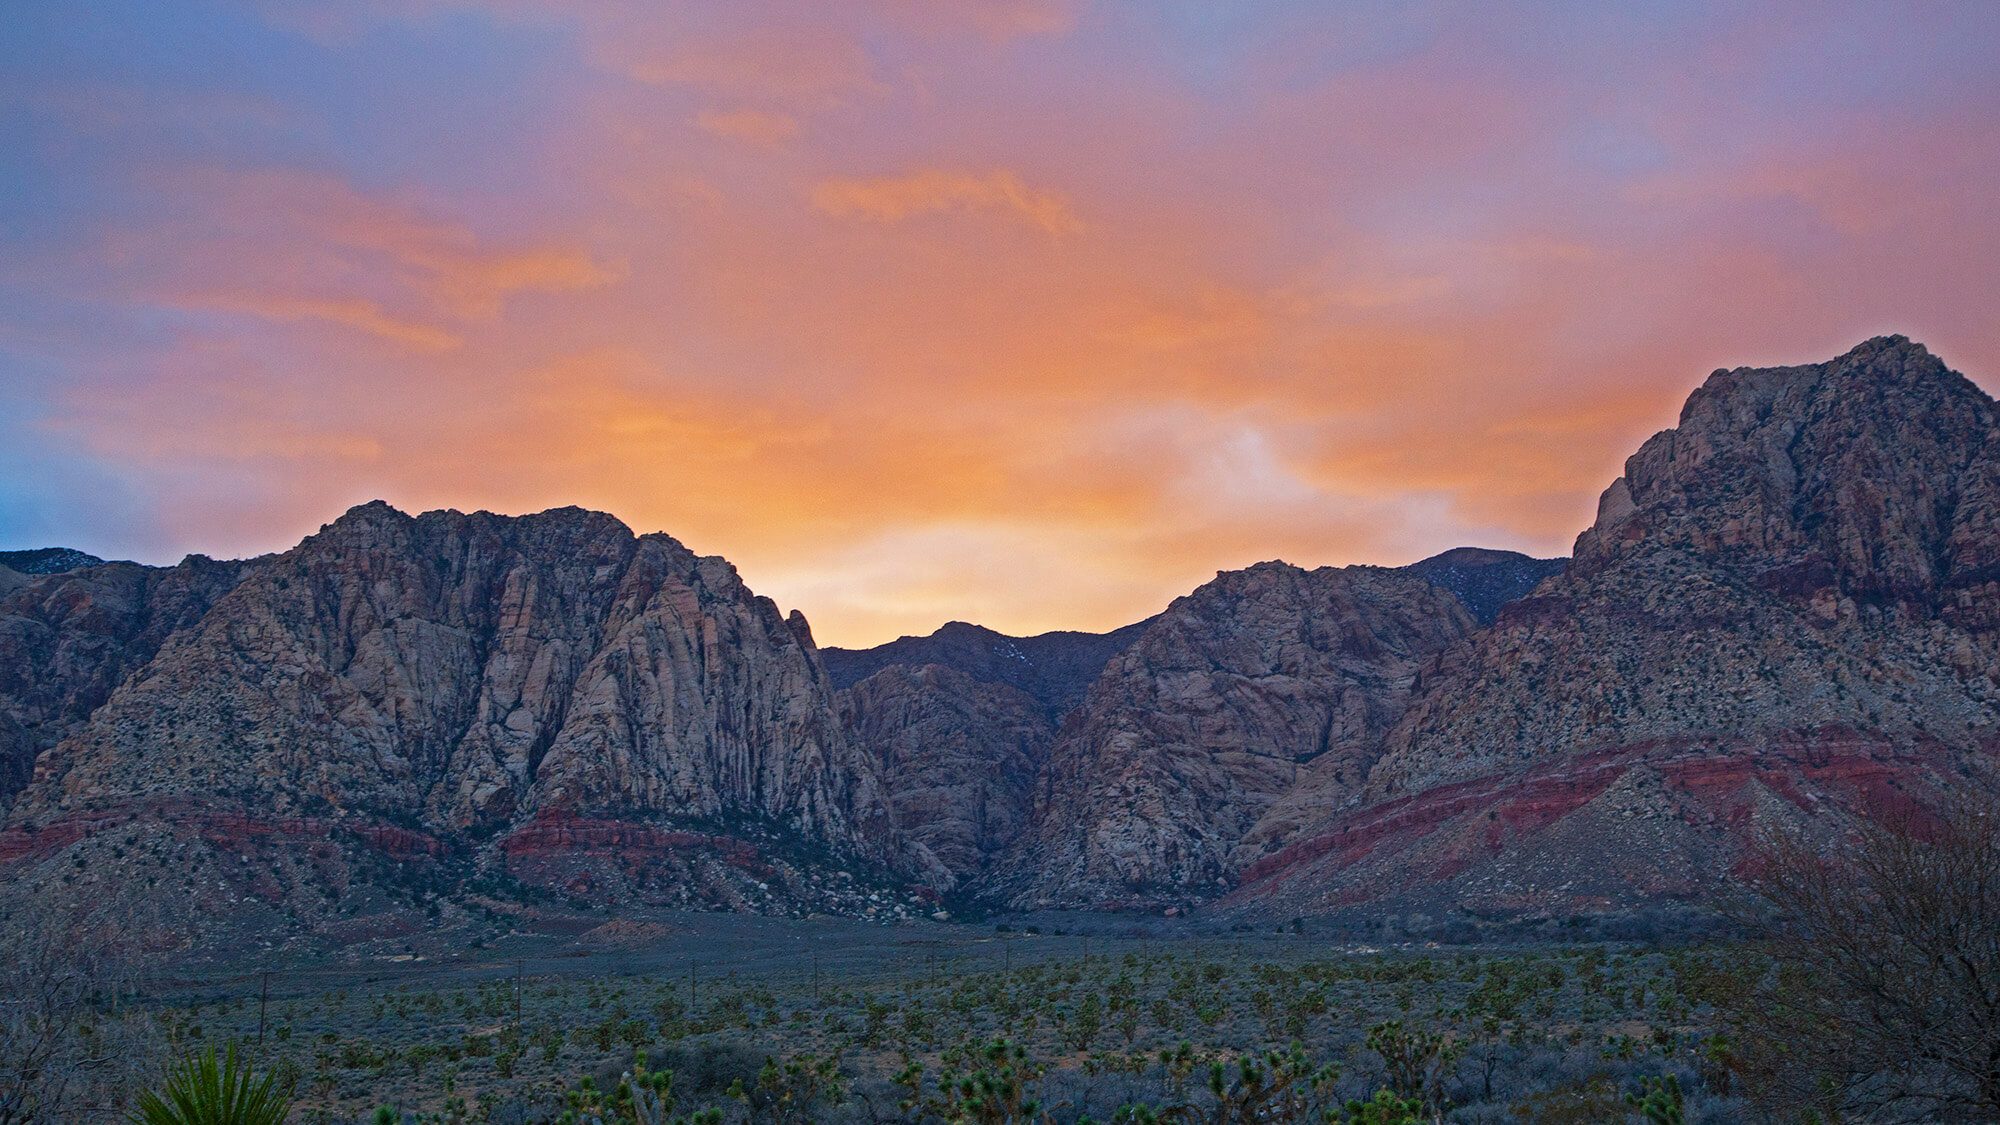 sunset at spring mountain ranch state park